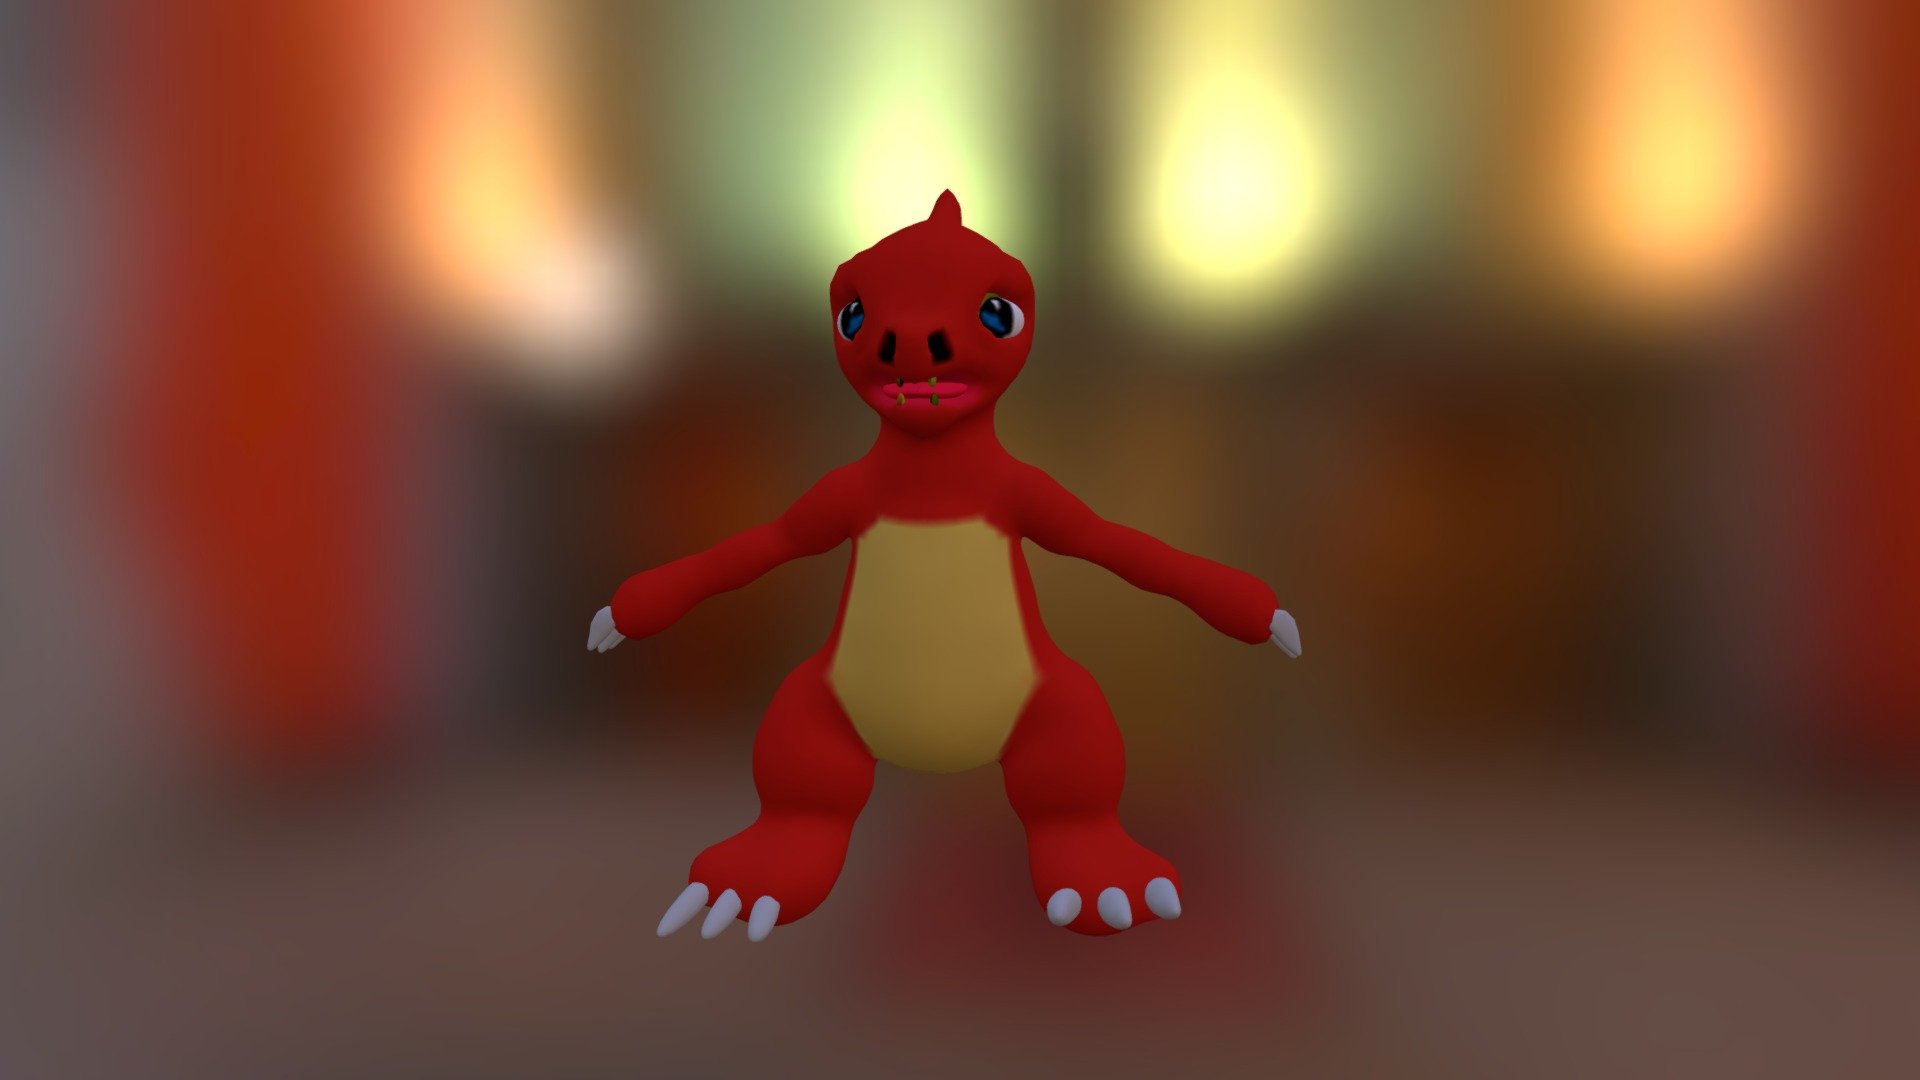 Charmeleon Character Pokèmon Type Fire and optimized for mobile game and Nintendo 3DS game Fan Art - Charmeleon Pokèmon - Download Free 3D model by xeratdragons (@dragonights91) 3d model